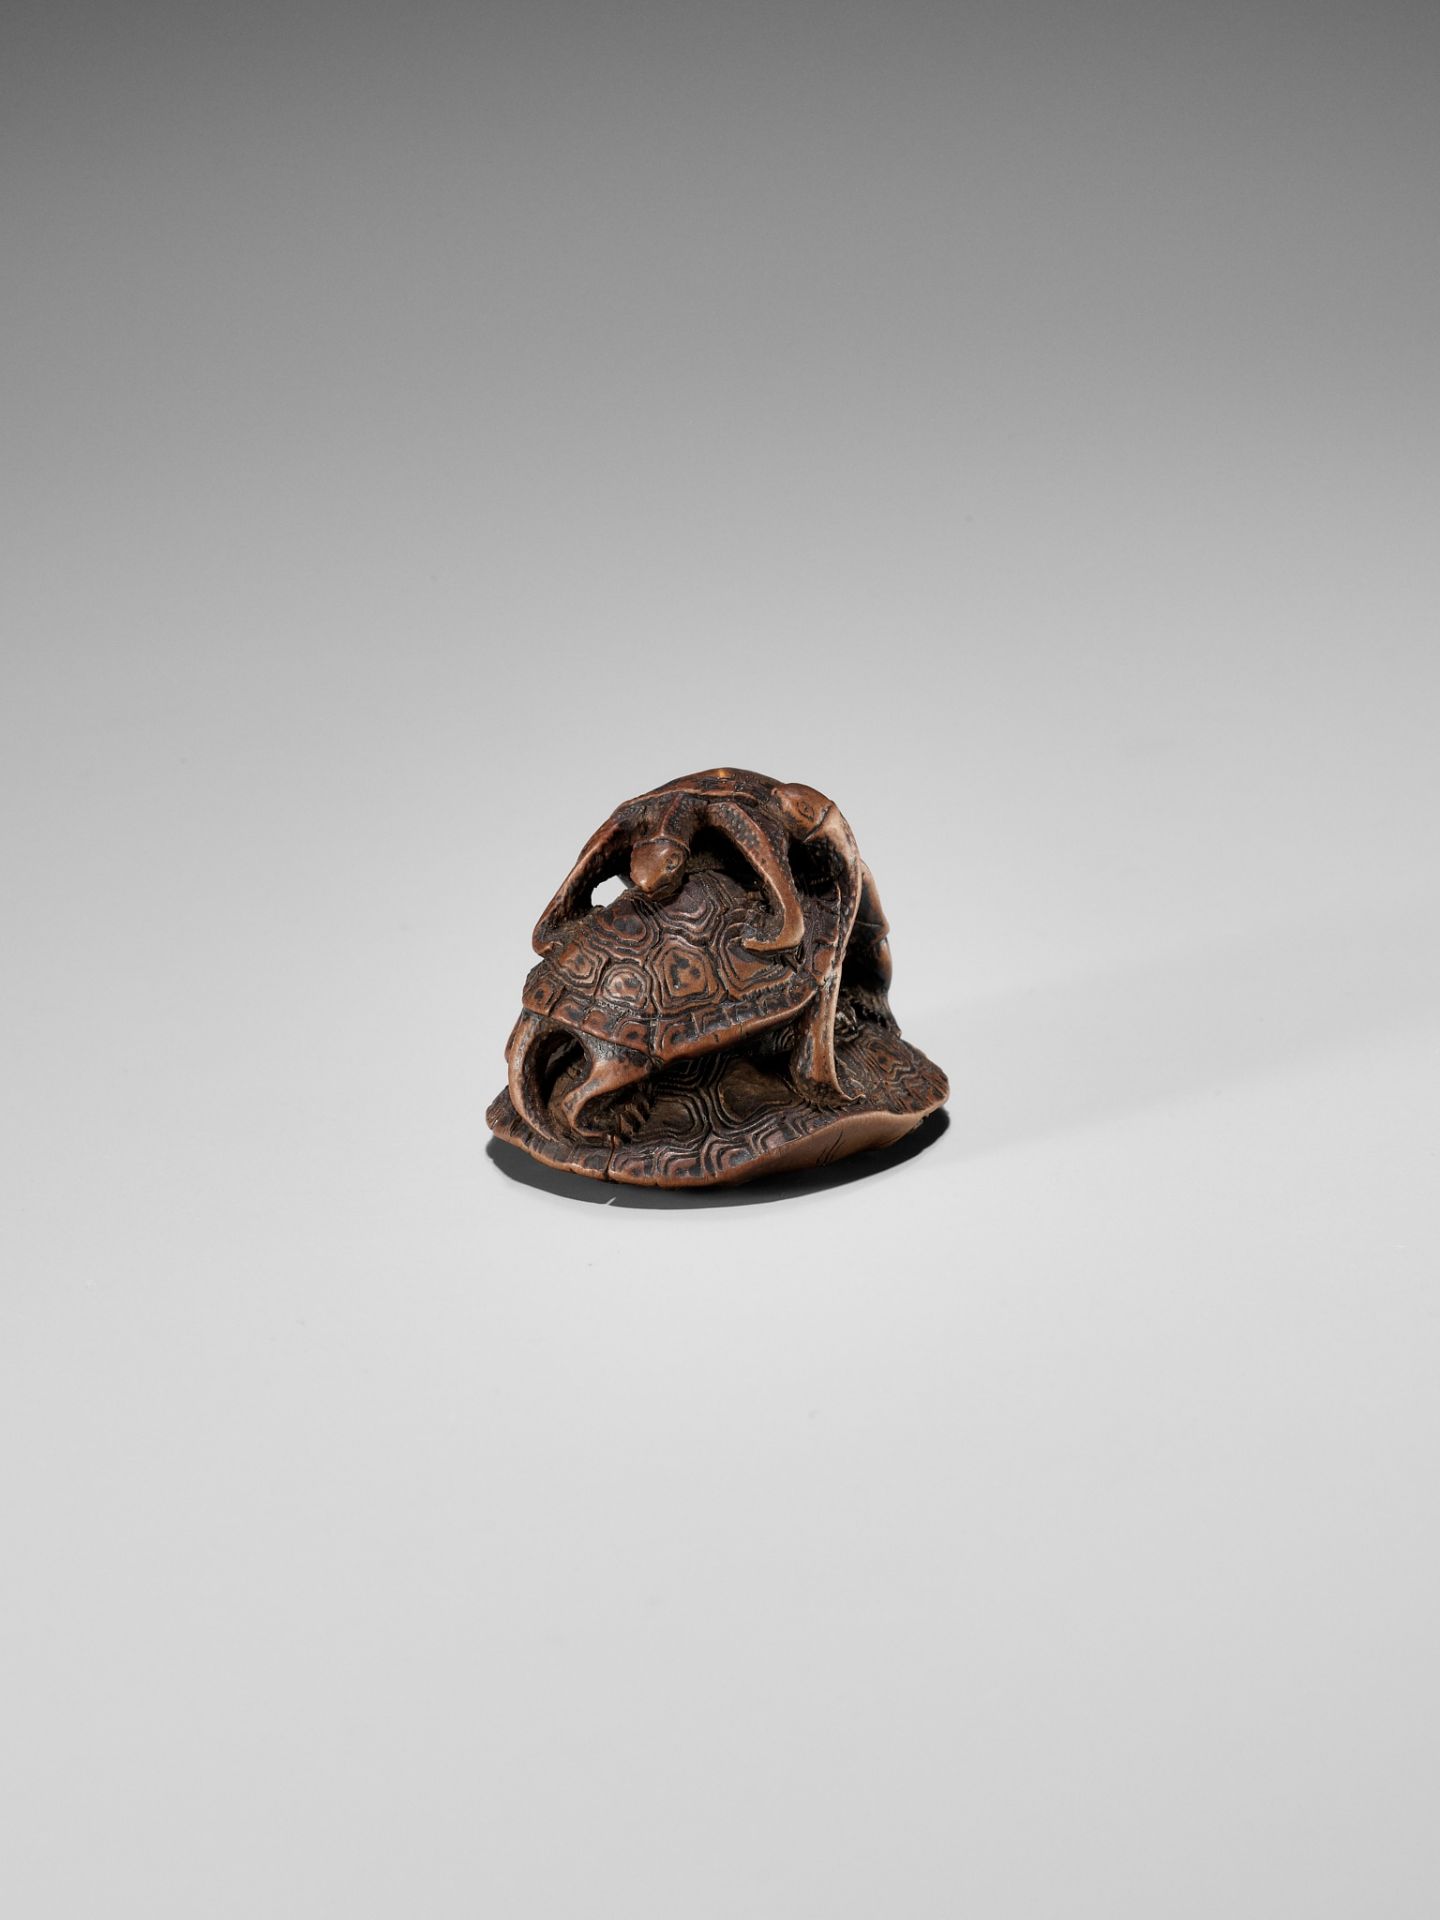 SEIGYOKU: A WOOD NETSUKE OF THREE TURTLES IN A PYRAMID - Image 10 of 11